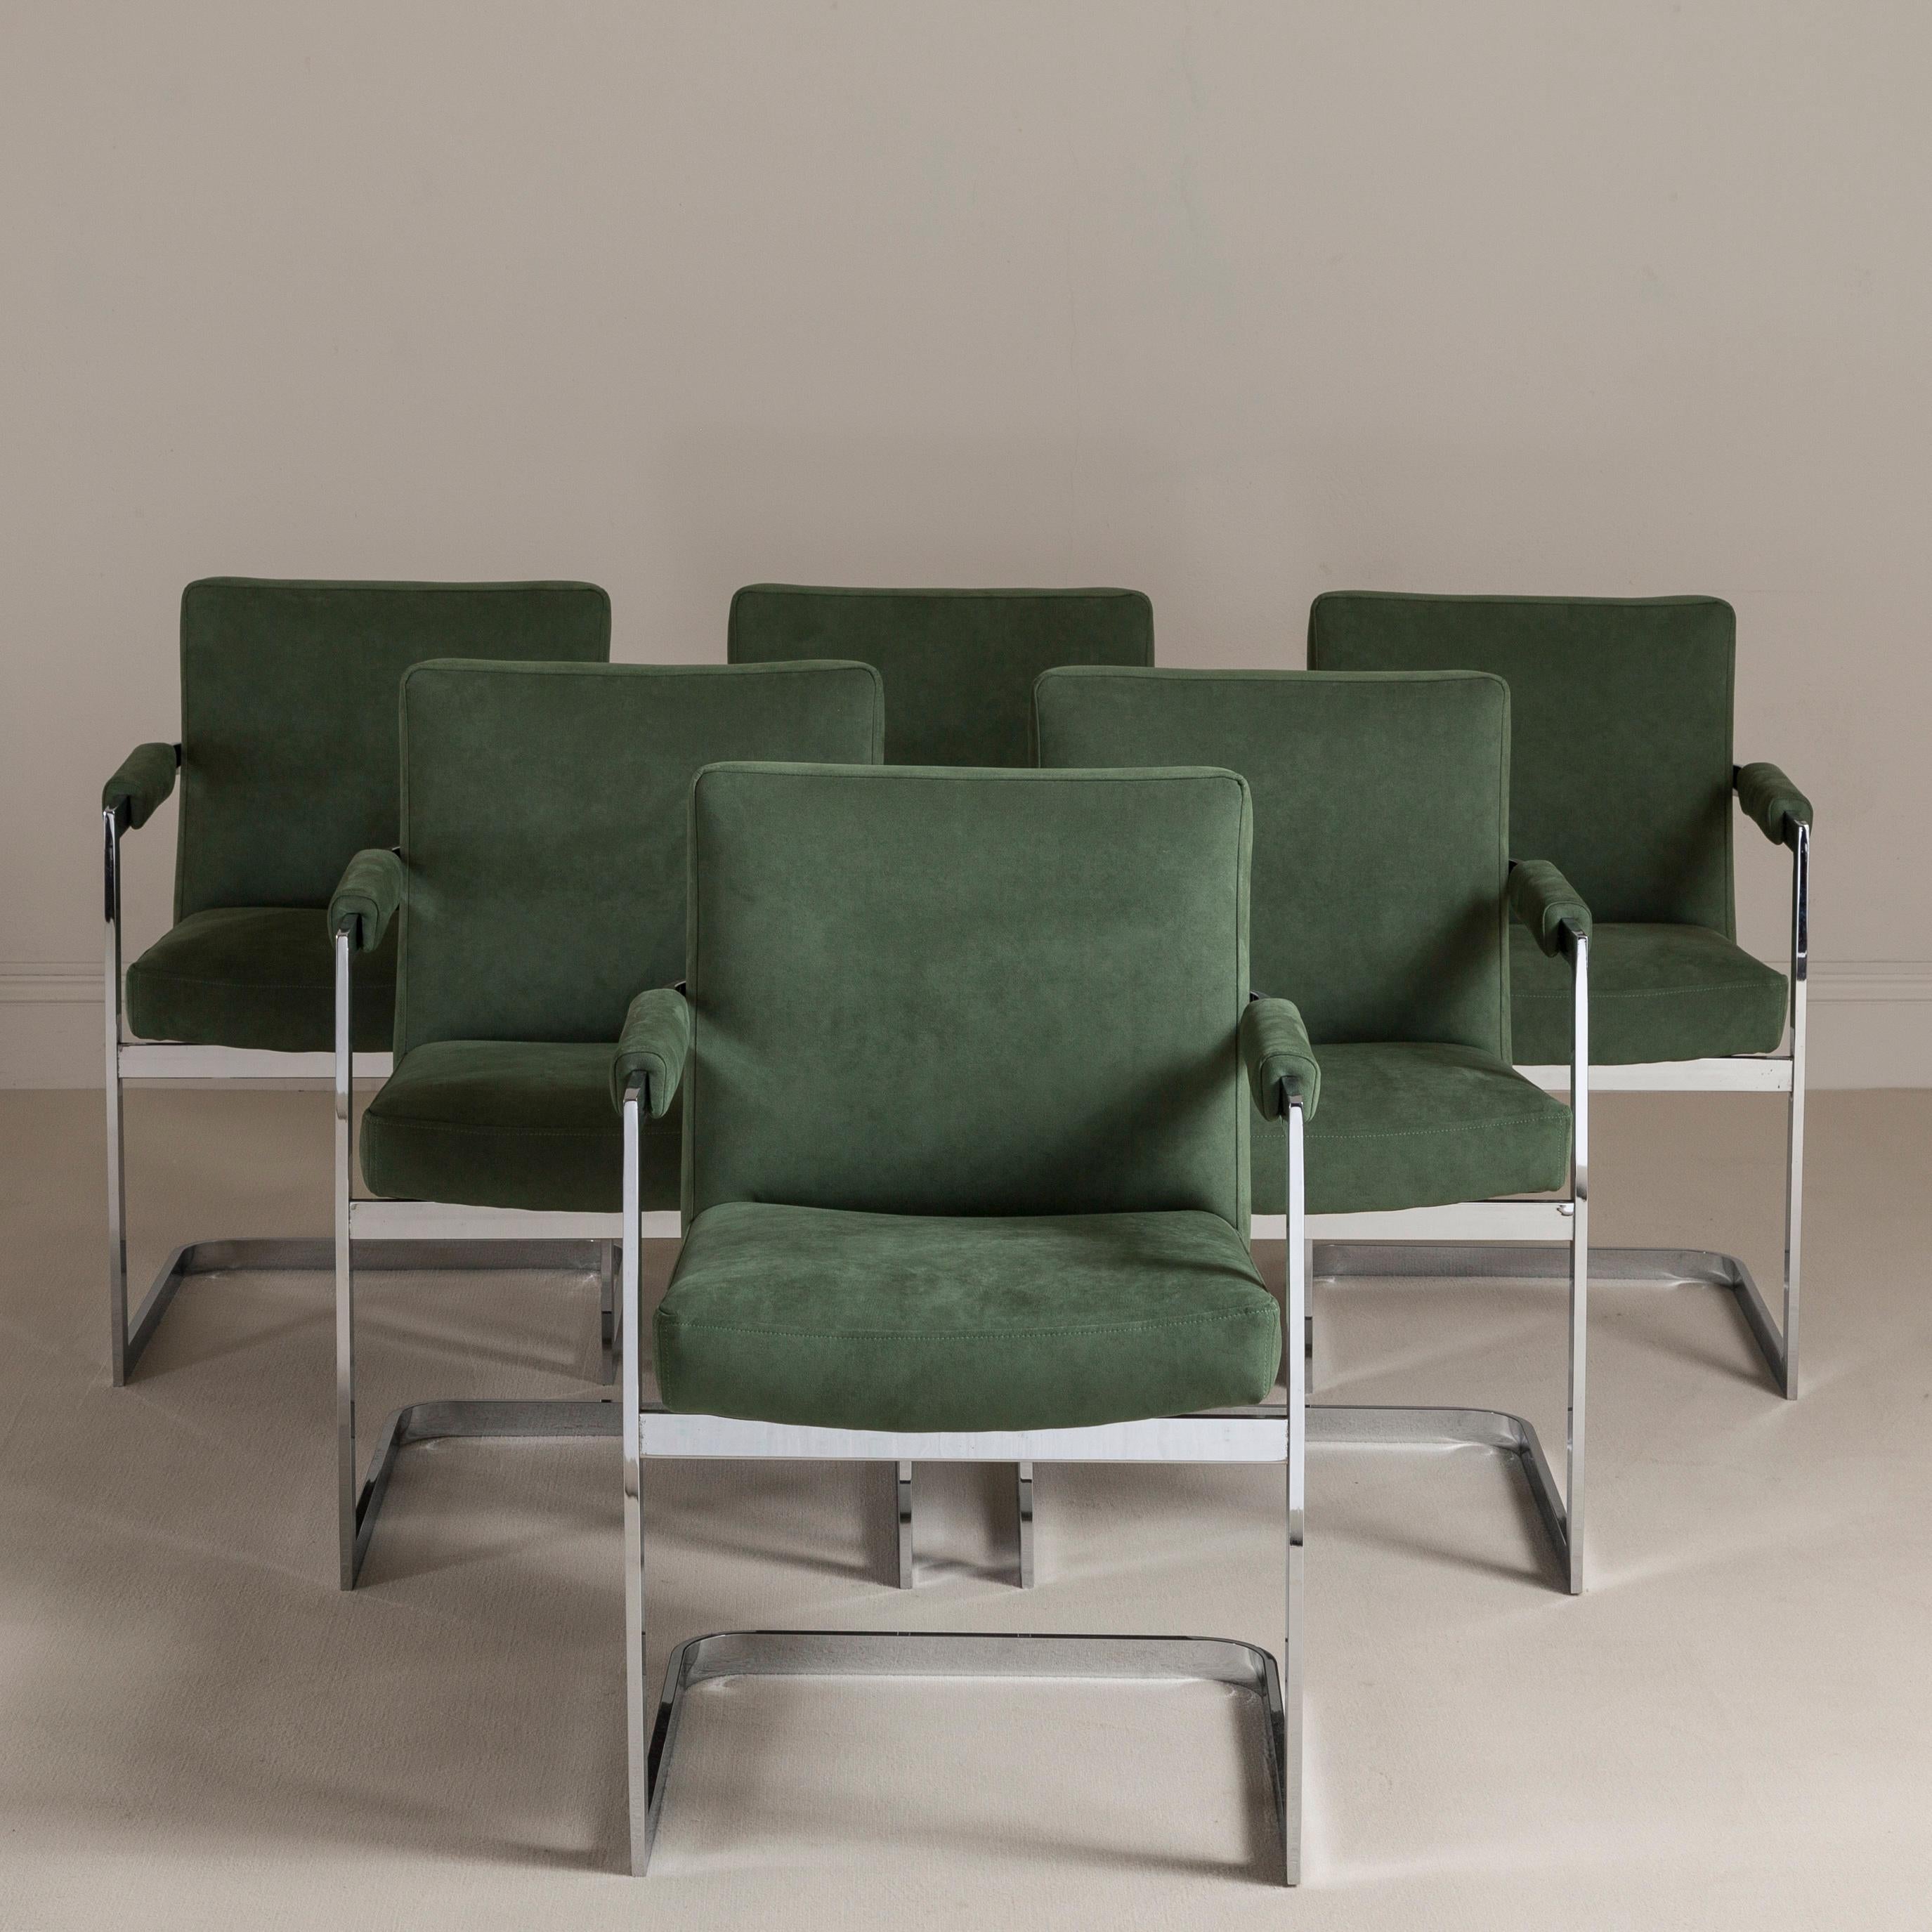 A set of six chromium steel cantilevered dining/armchairs, upholstered in a deep green alcantara including the armpads 1970s.

These chairs have a sleek mid century modern design and are very comfortable dining chairs. 


  